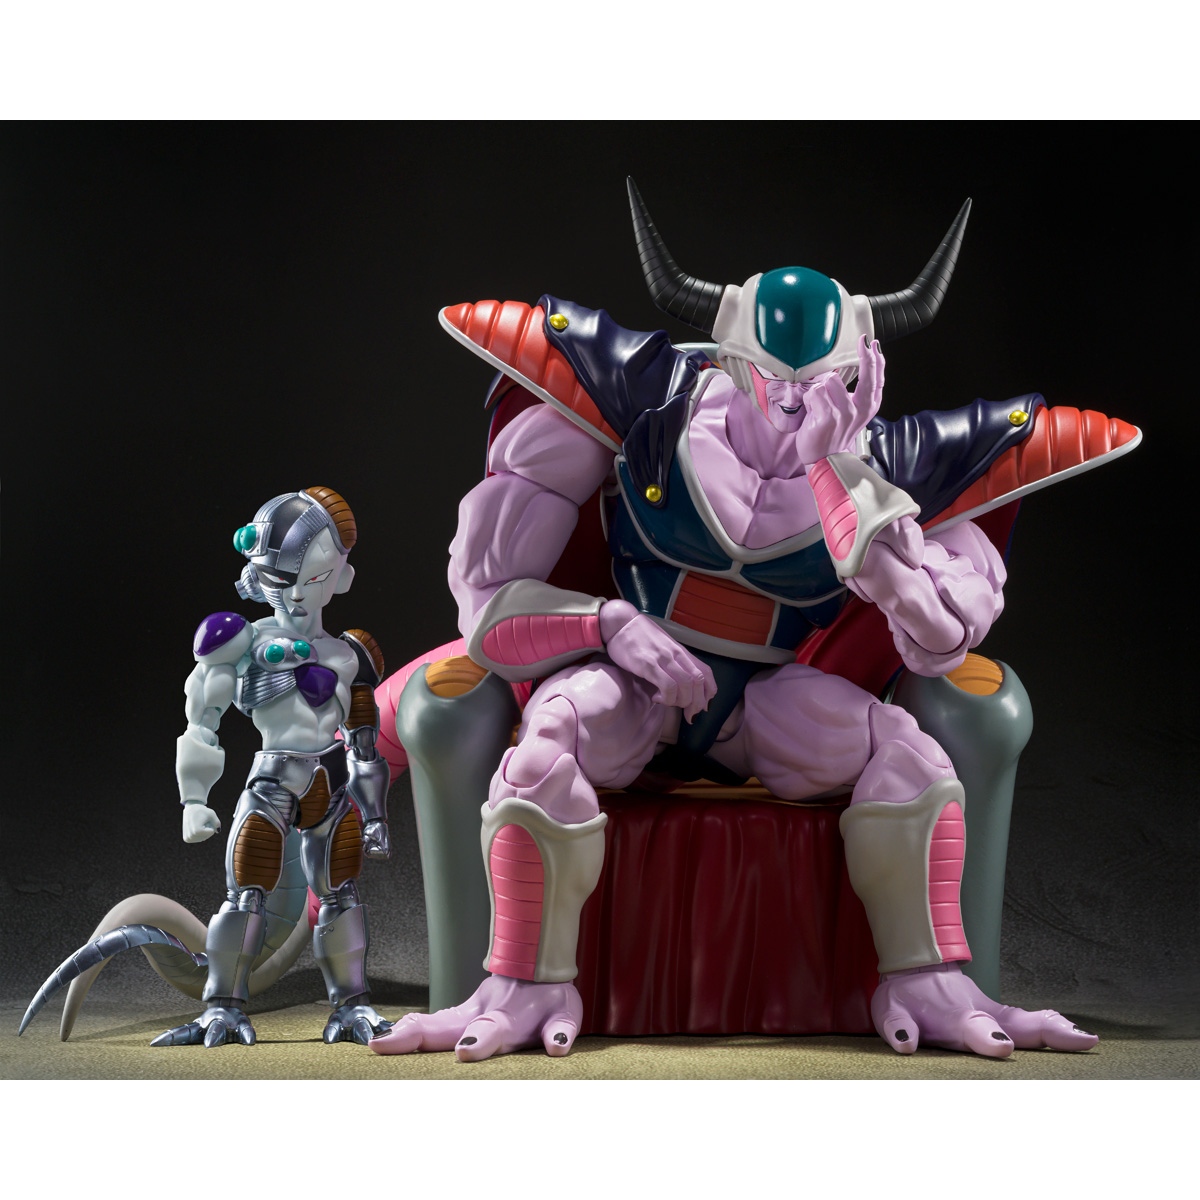 Pre-orders for the S.H.Figuarts King Cold end tomorrow, April 28th, at 10:59AM (EDT)! Pre-order yours before it's too late! 🛍️ p-bandai.com/us/item/N27266… #KingCold #Frieza #DragonBallZ #SHFiguarts #TamashiiNations